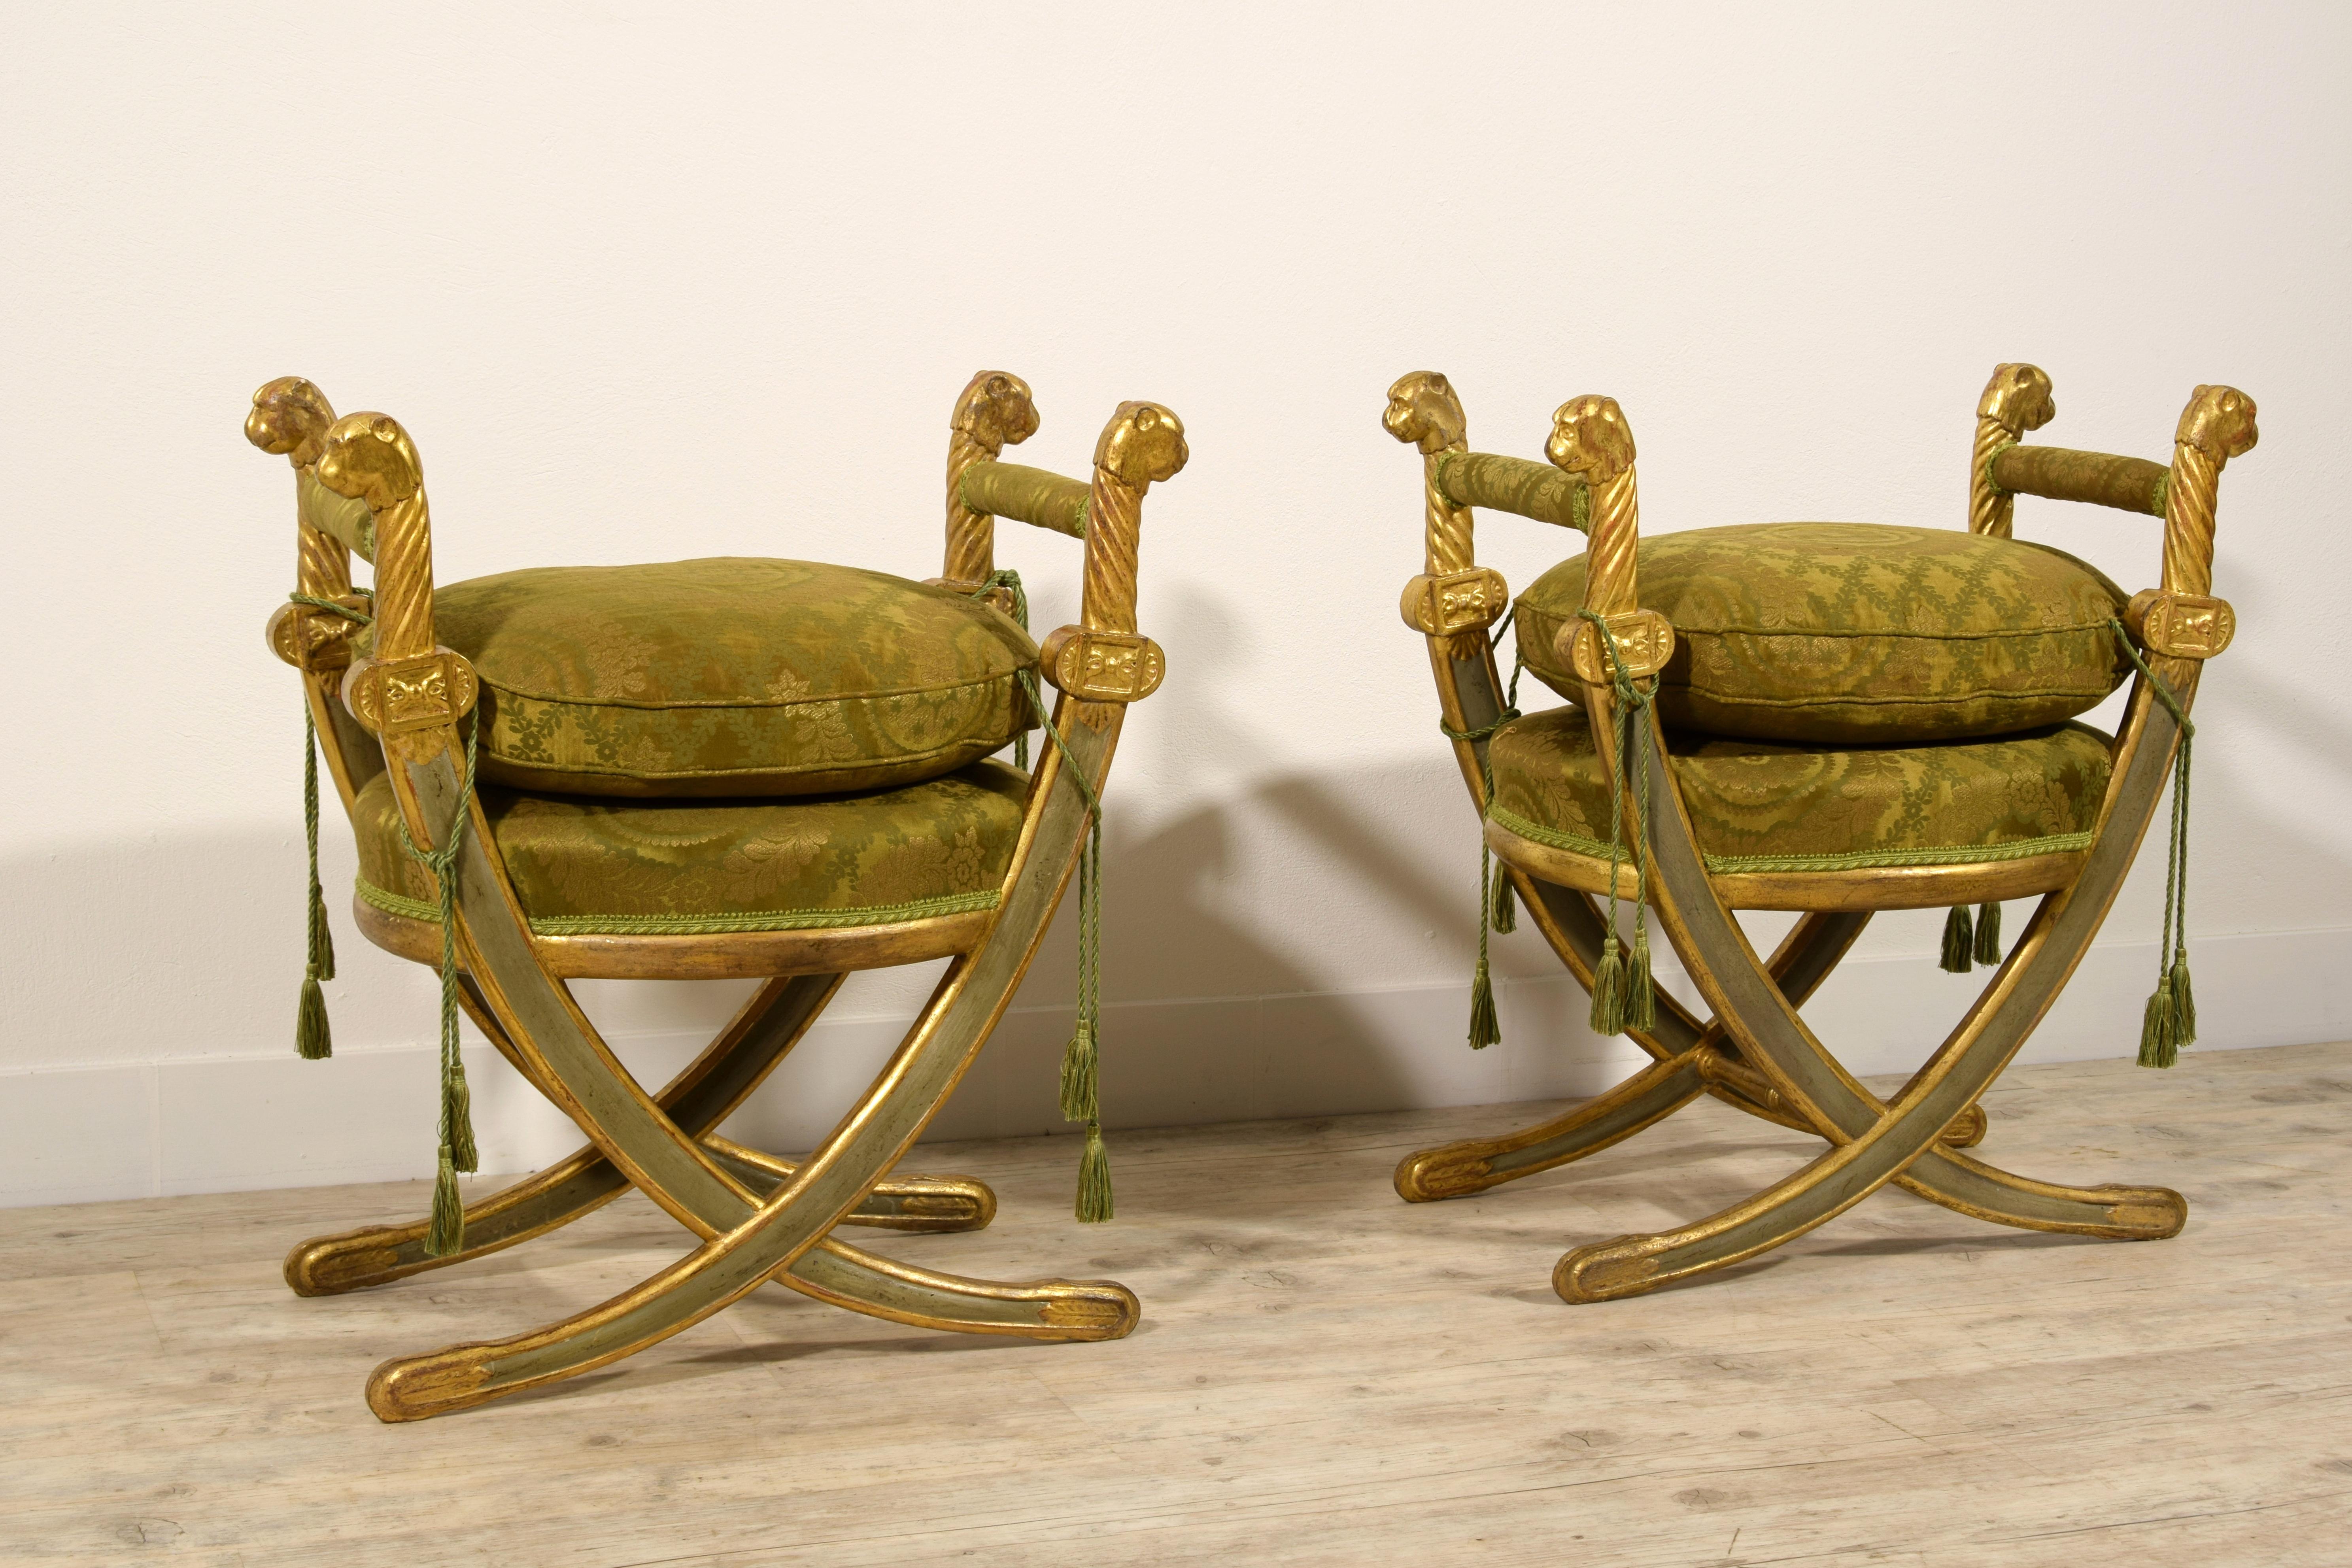 20th Century, Pair of Neoclassical Italian Carved Lacquered Gilt Wood Stools For Sale 1